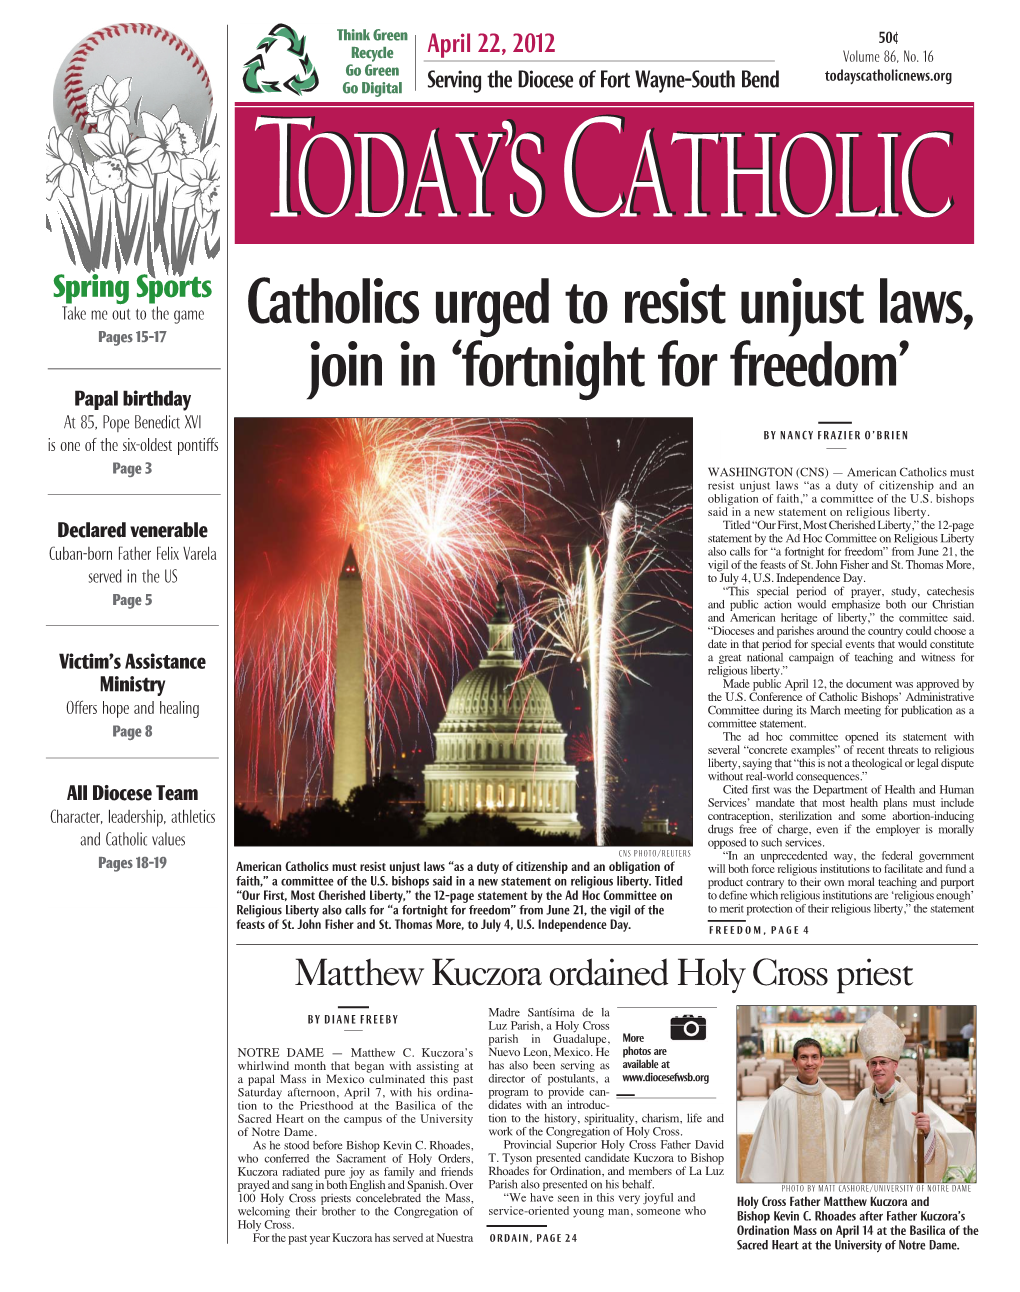 Catholics Urged to Resist Unjust Laws, Join in 'Fortnight for Freedom'